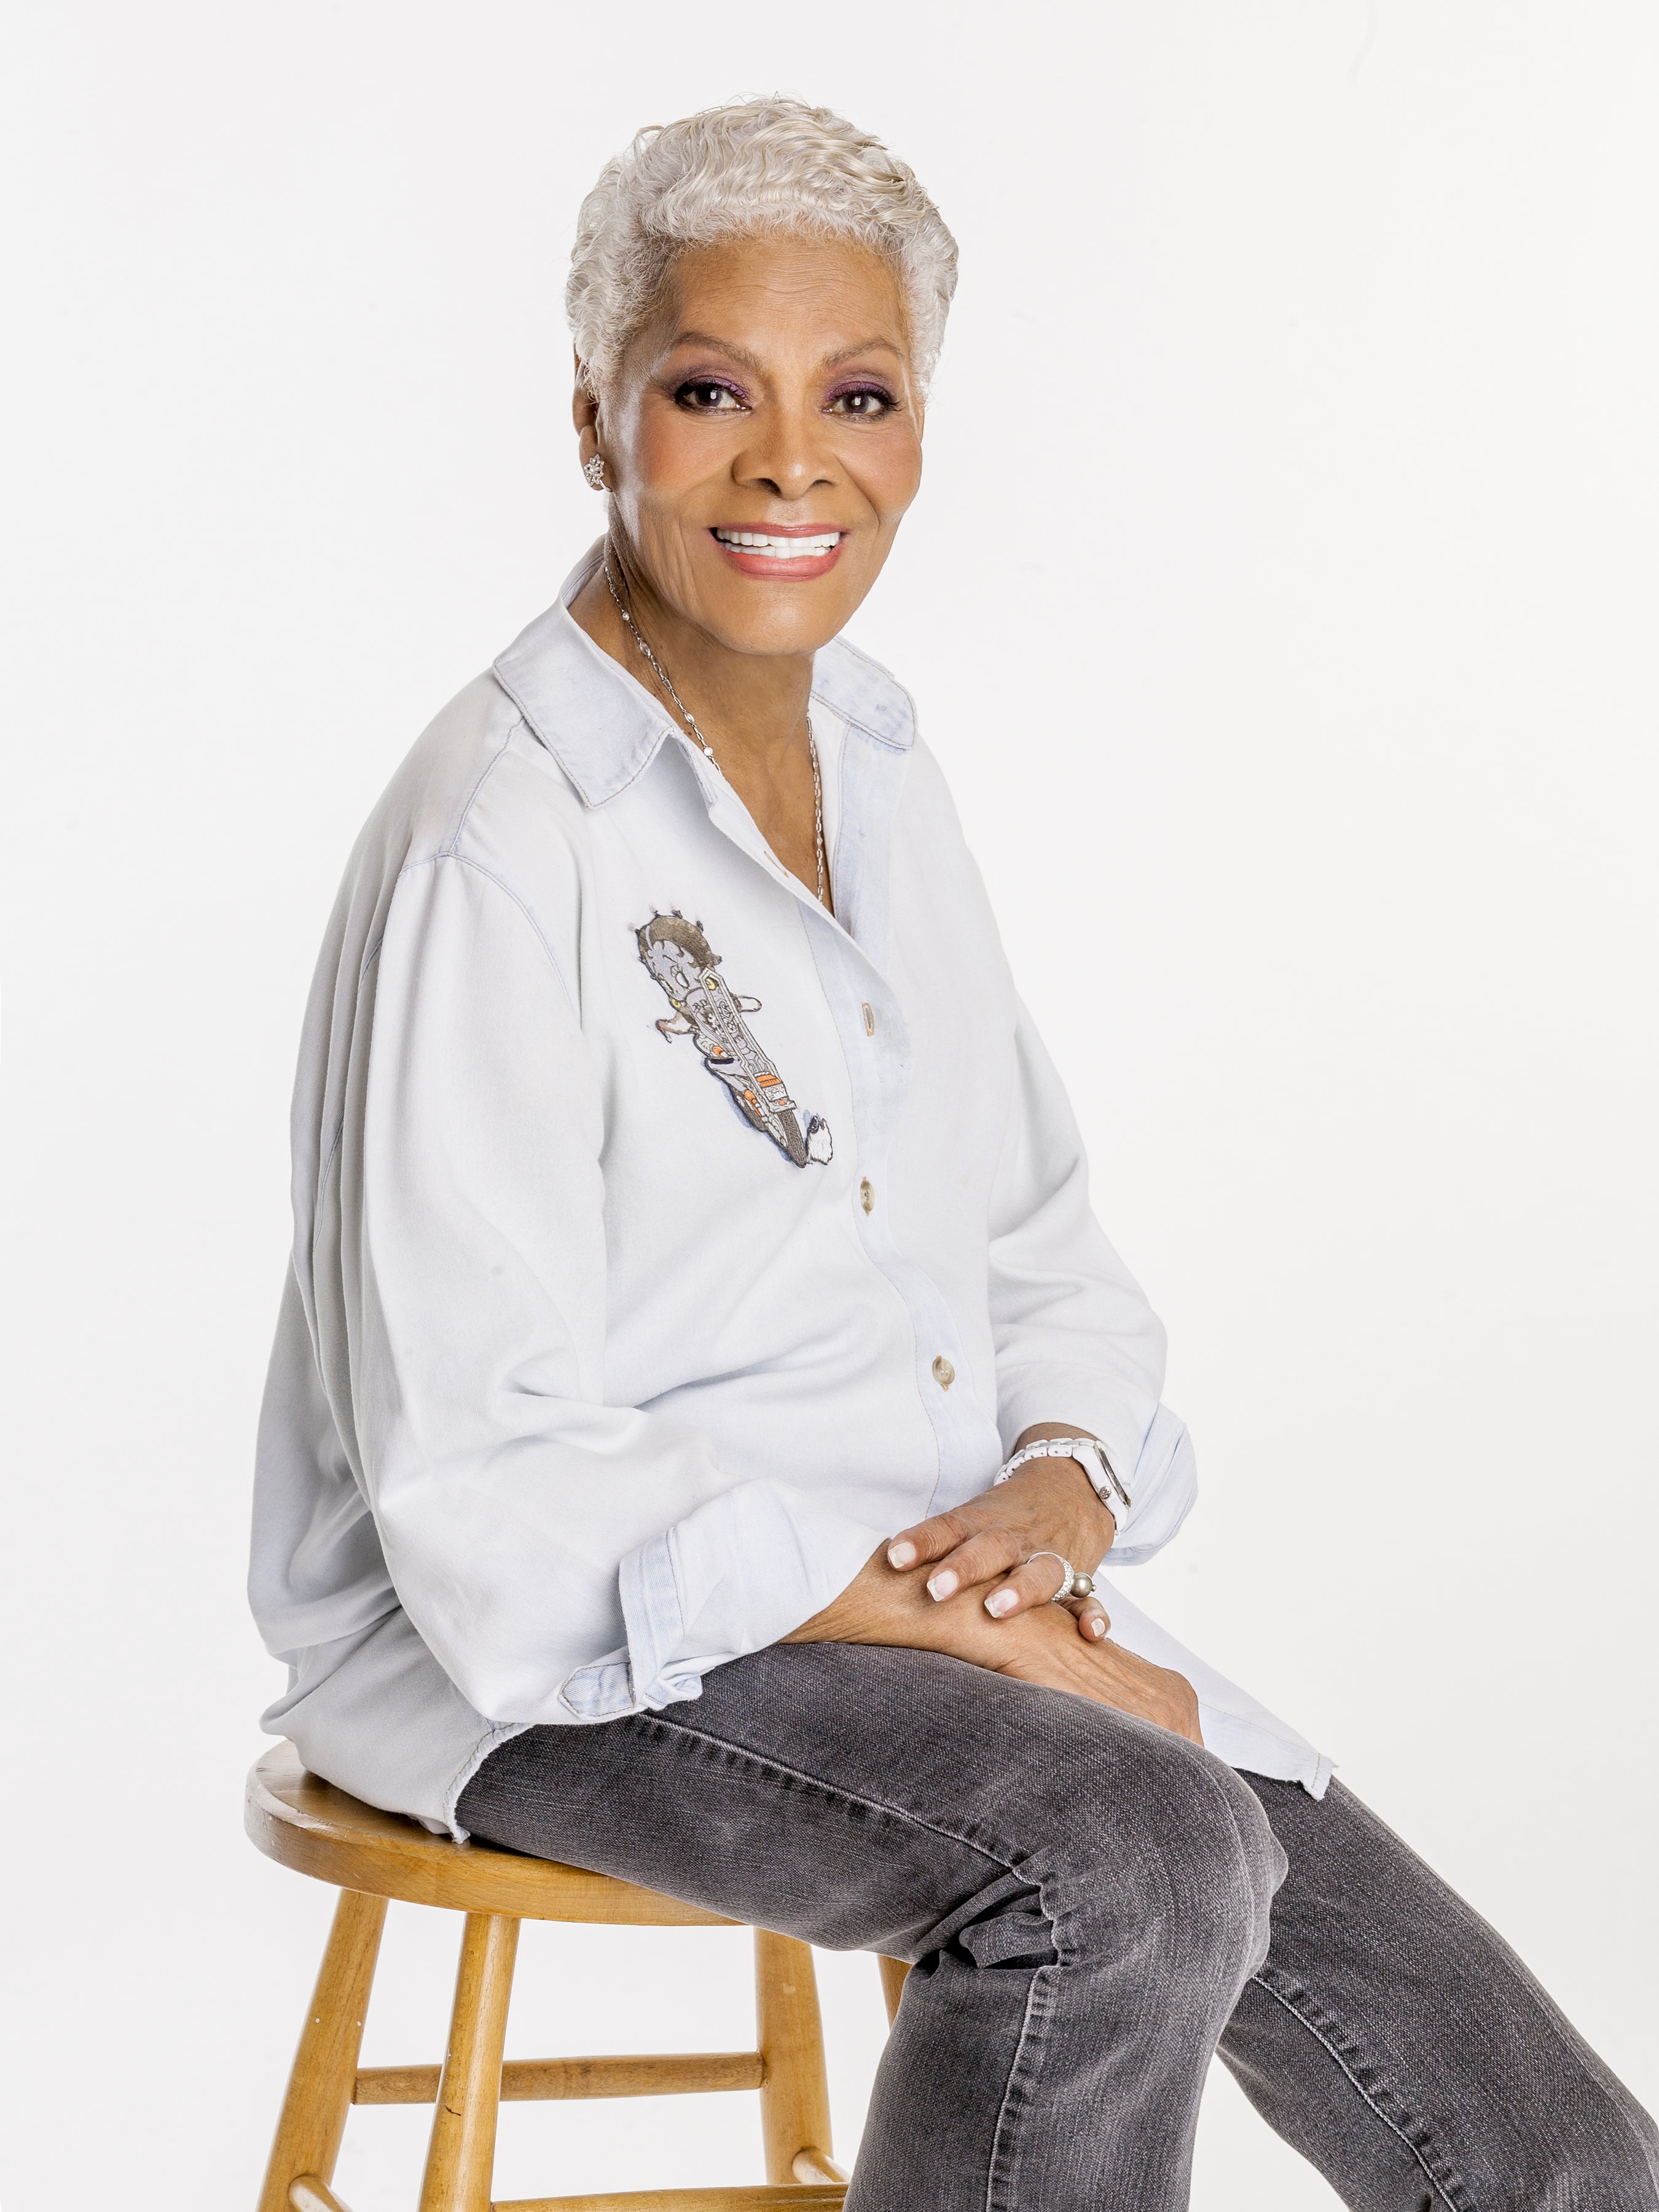 Dionne Warwick - Don't Make Me Over Event Title Pic